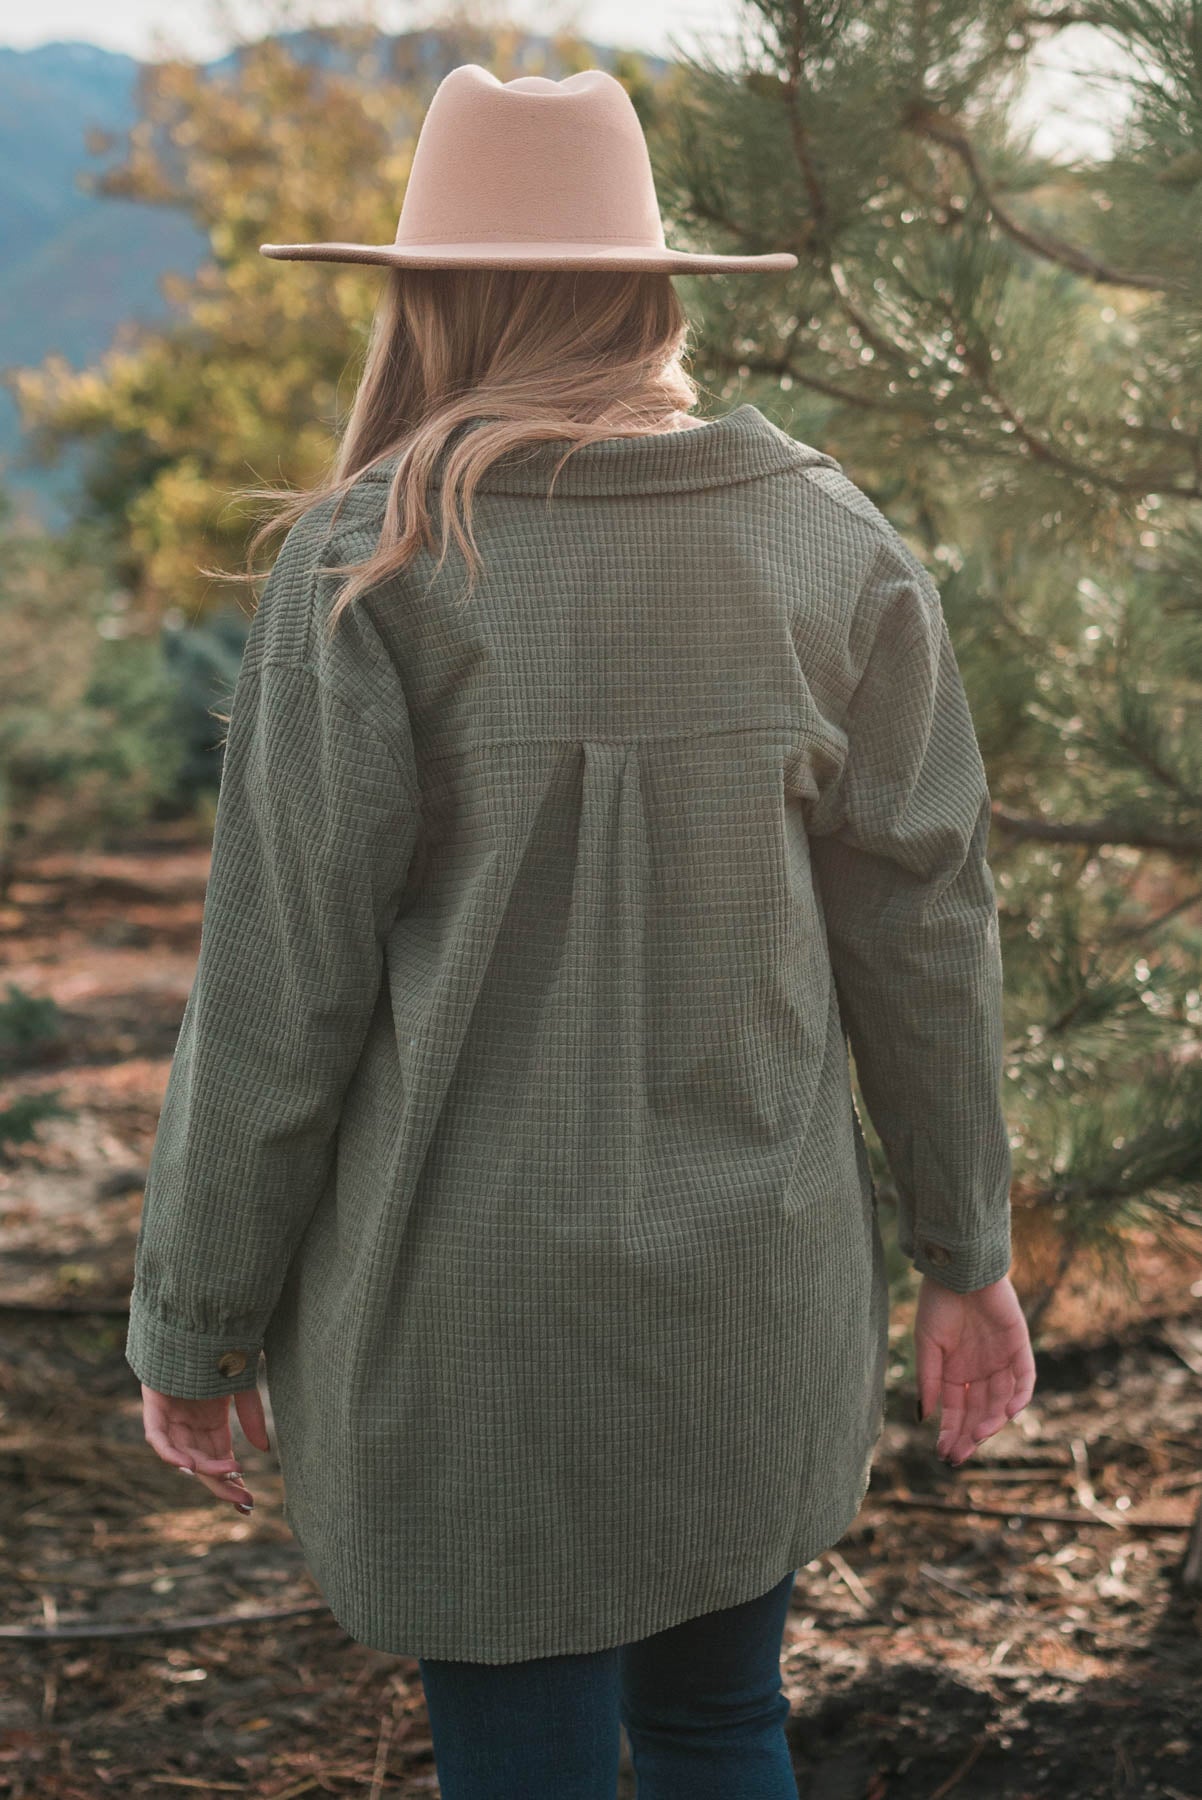 Back view of the olive shacket